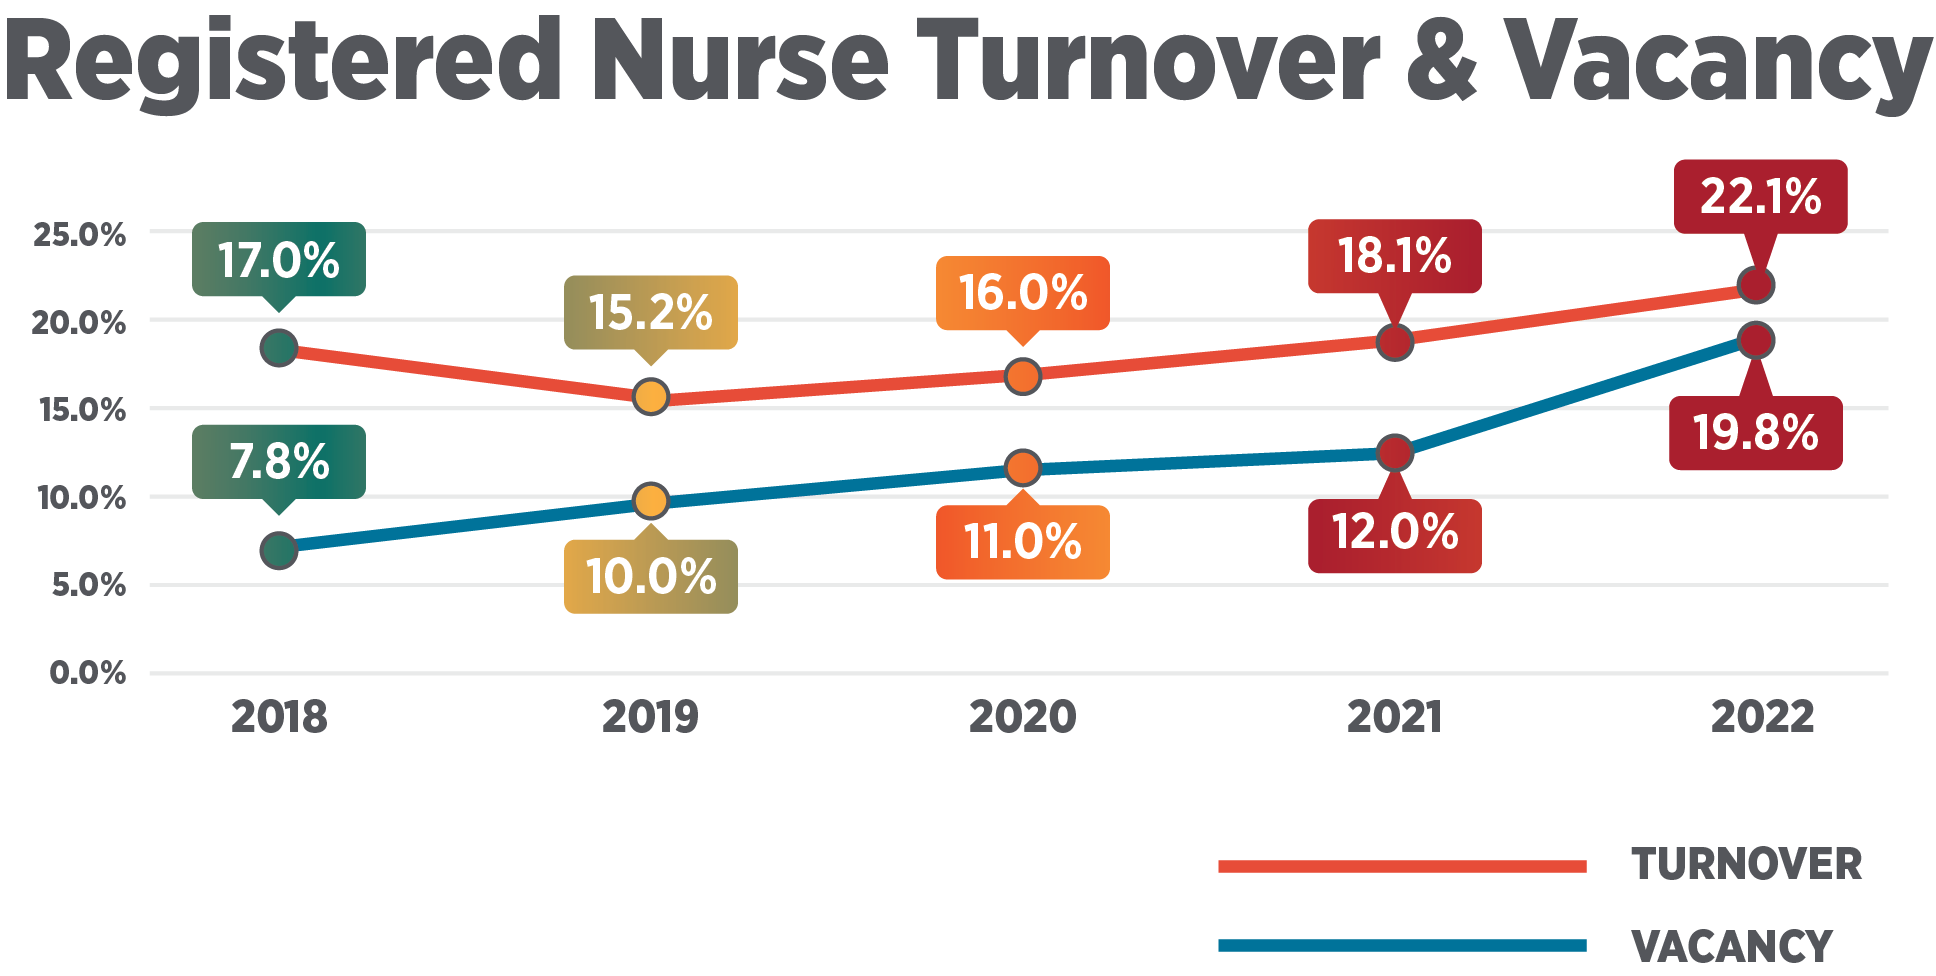 RN Turnover & Vacancy